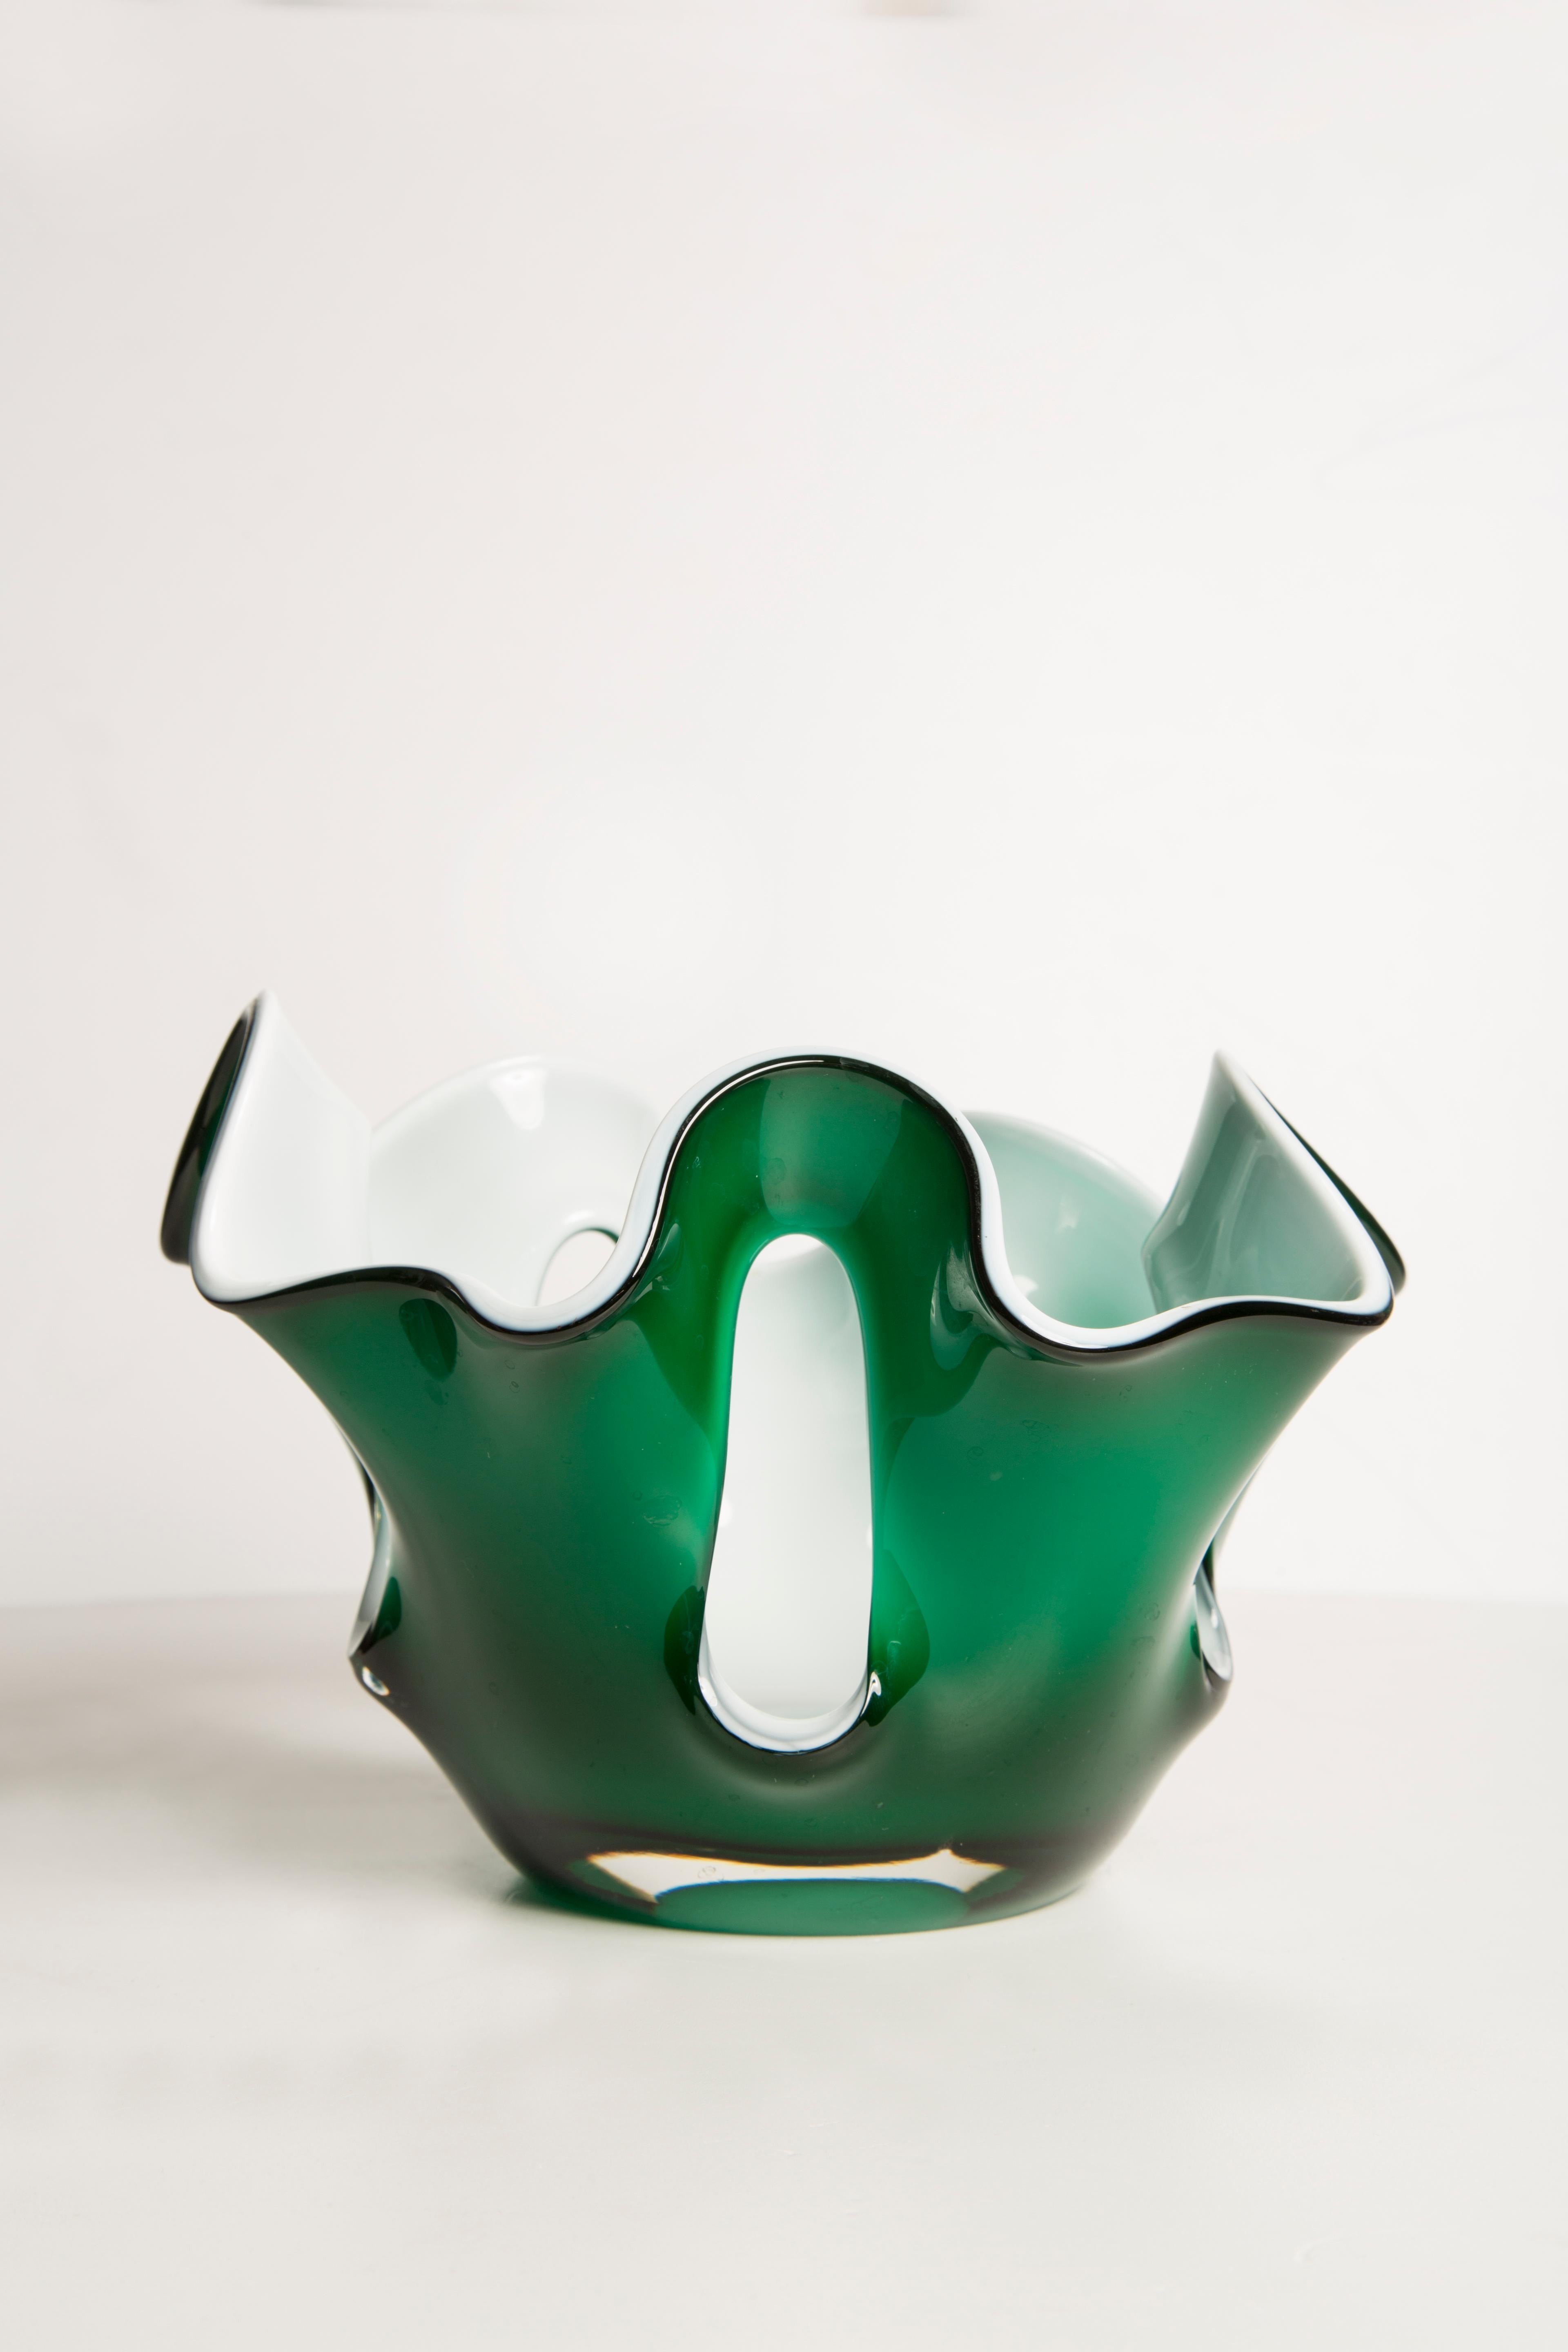 Italian Mid-Century Green and White Vase Artistic Bowl Candlestick, Europe, 1960s For Sale